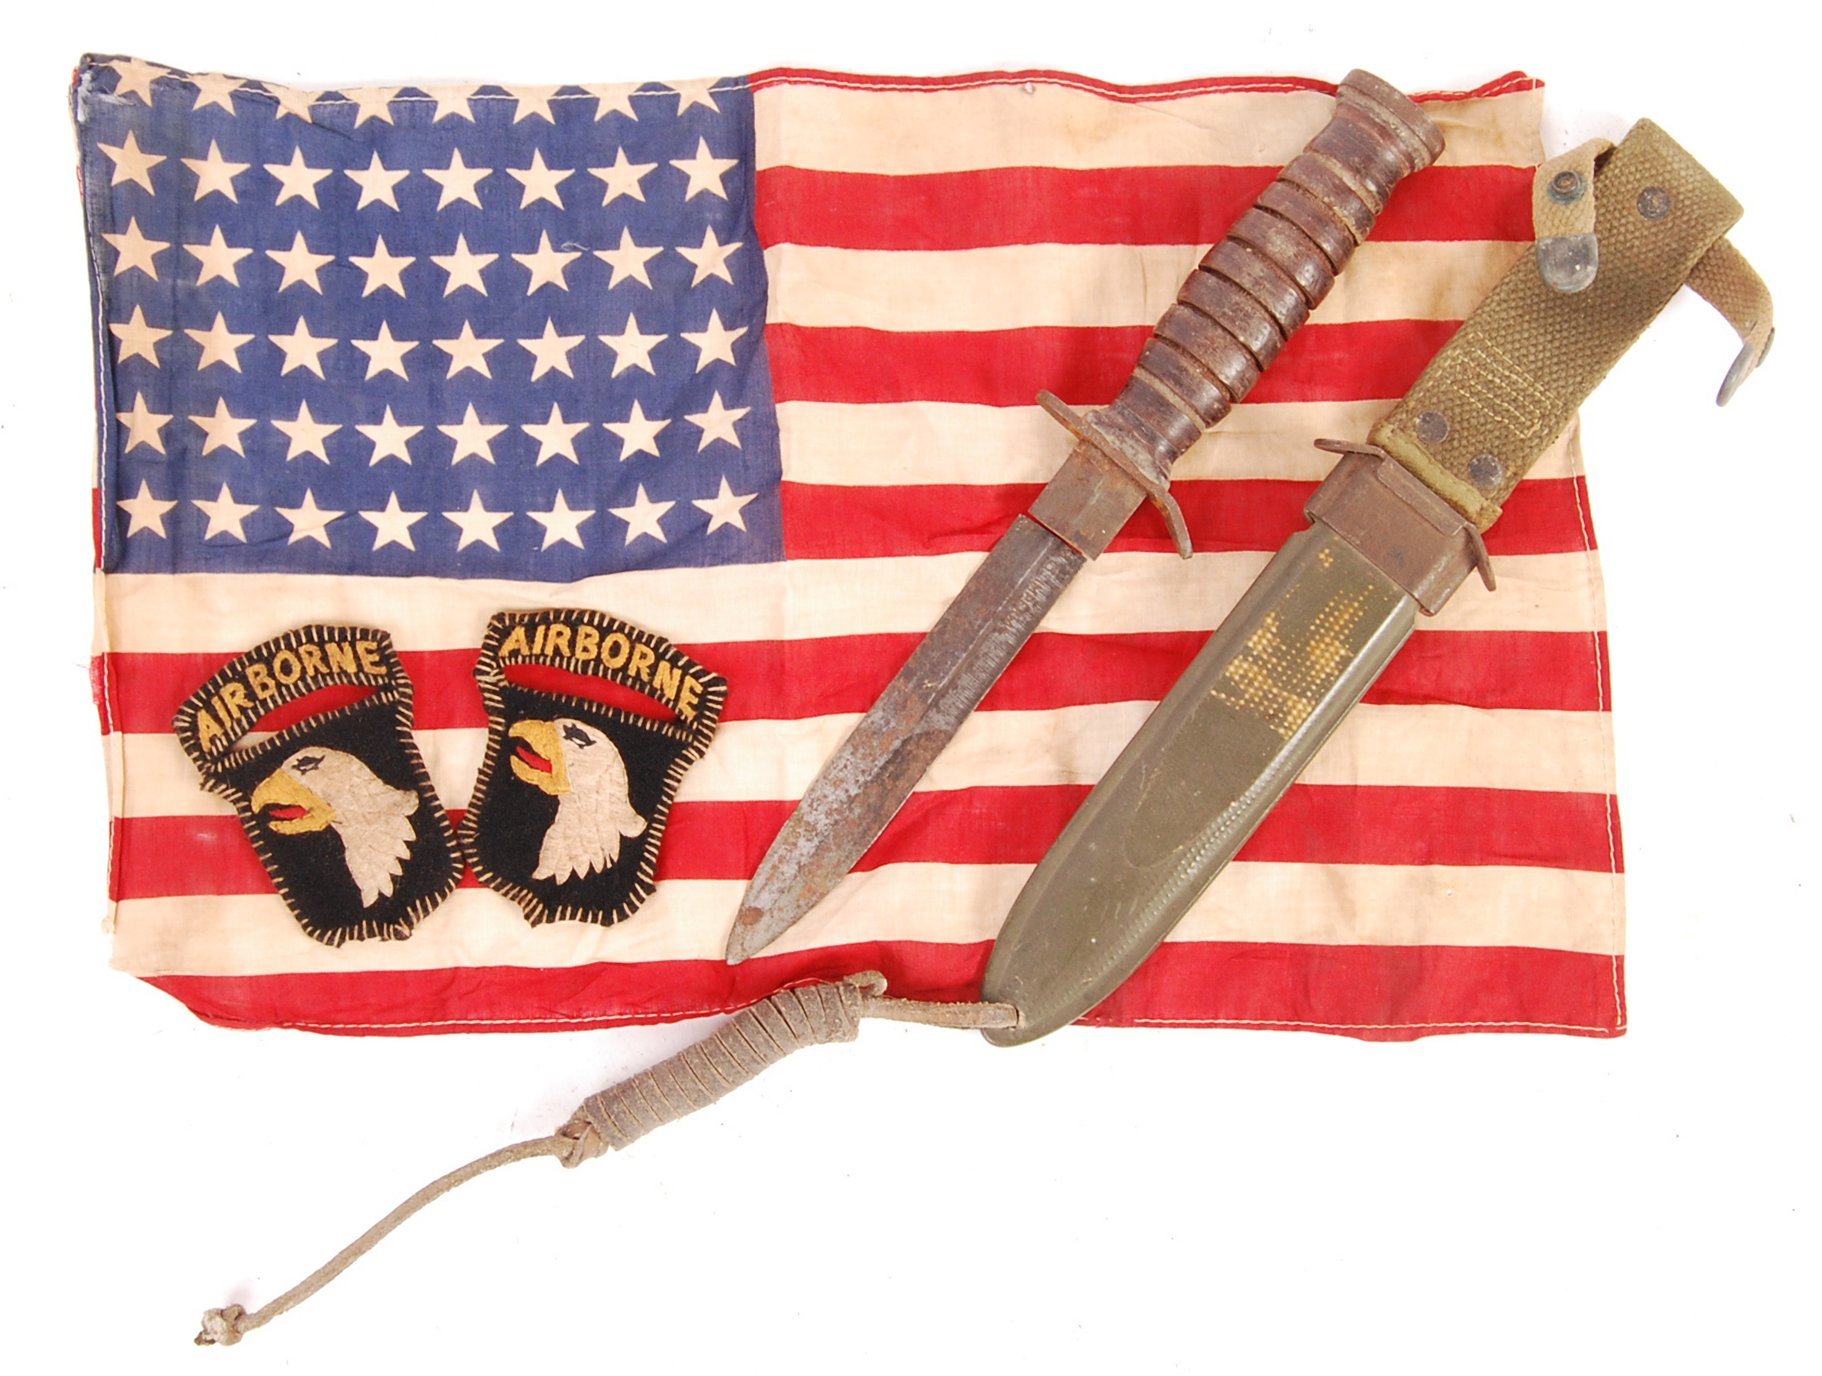 COLLECTION OF WWII US ARMY / AIRBORNE RELATED ITEM